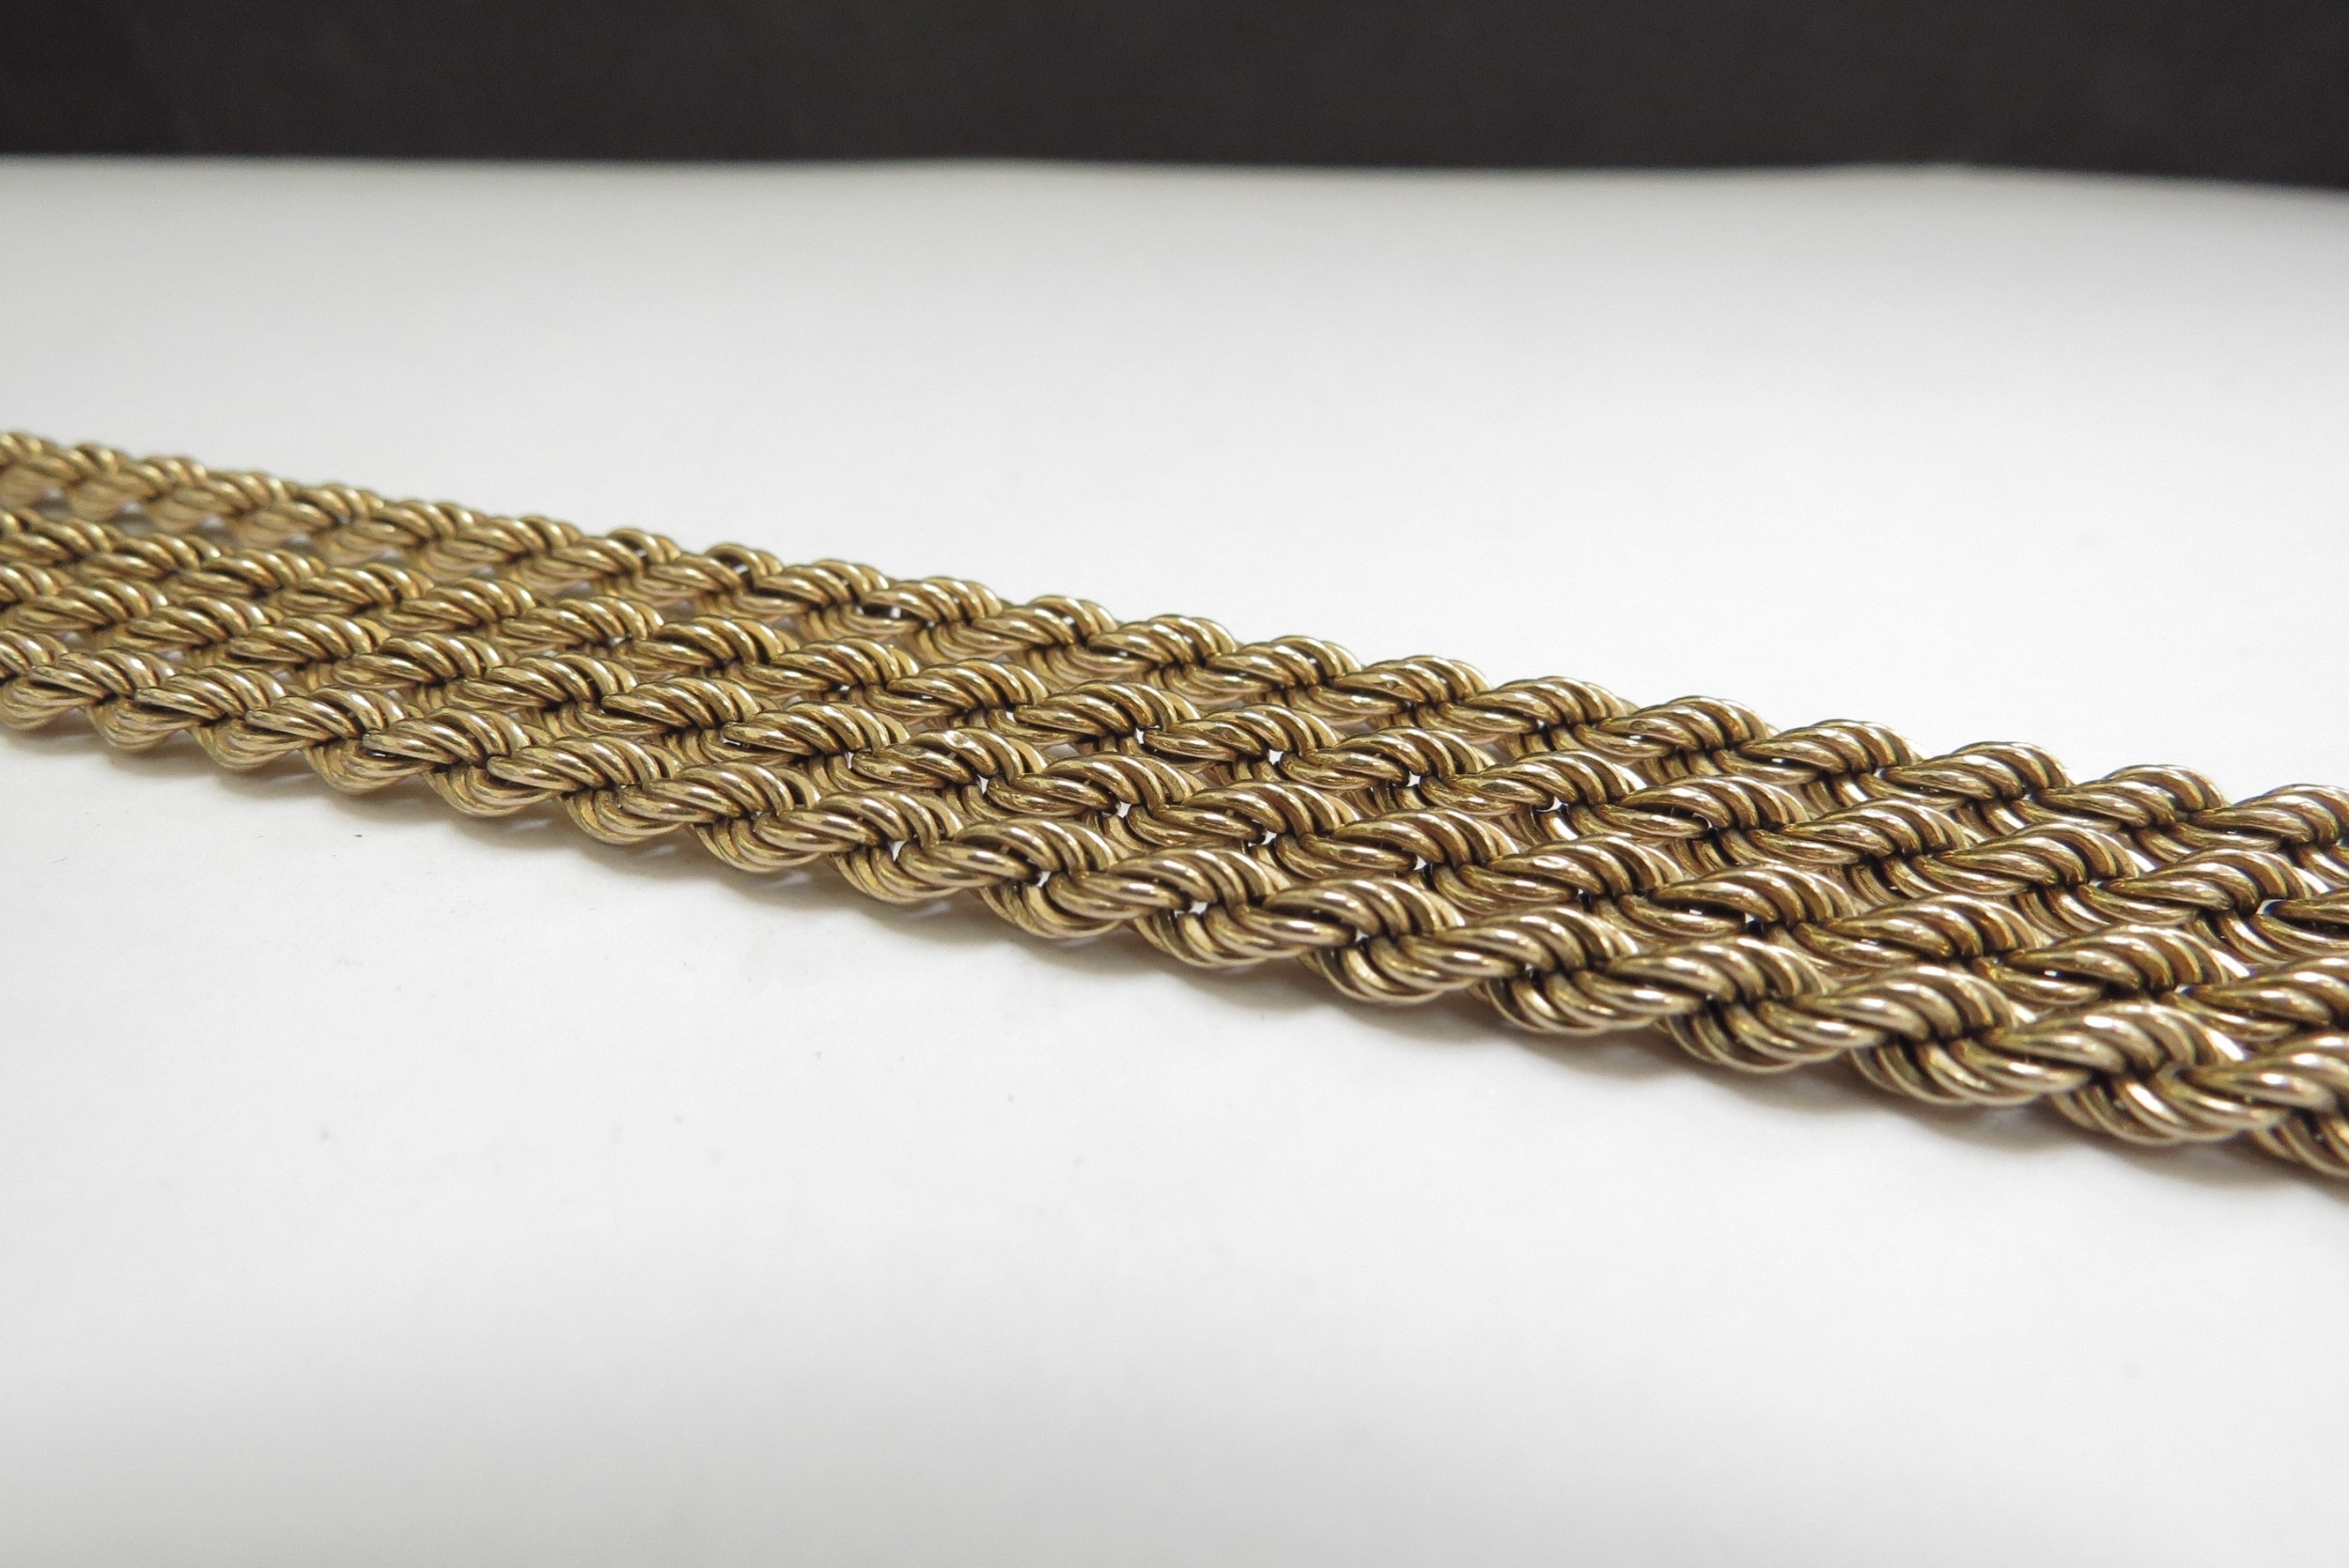 A 9ct gold rope twist necklace, 78cm long, 12.4g - Image 2 of 2